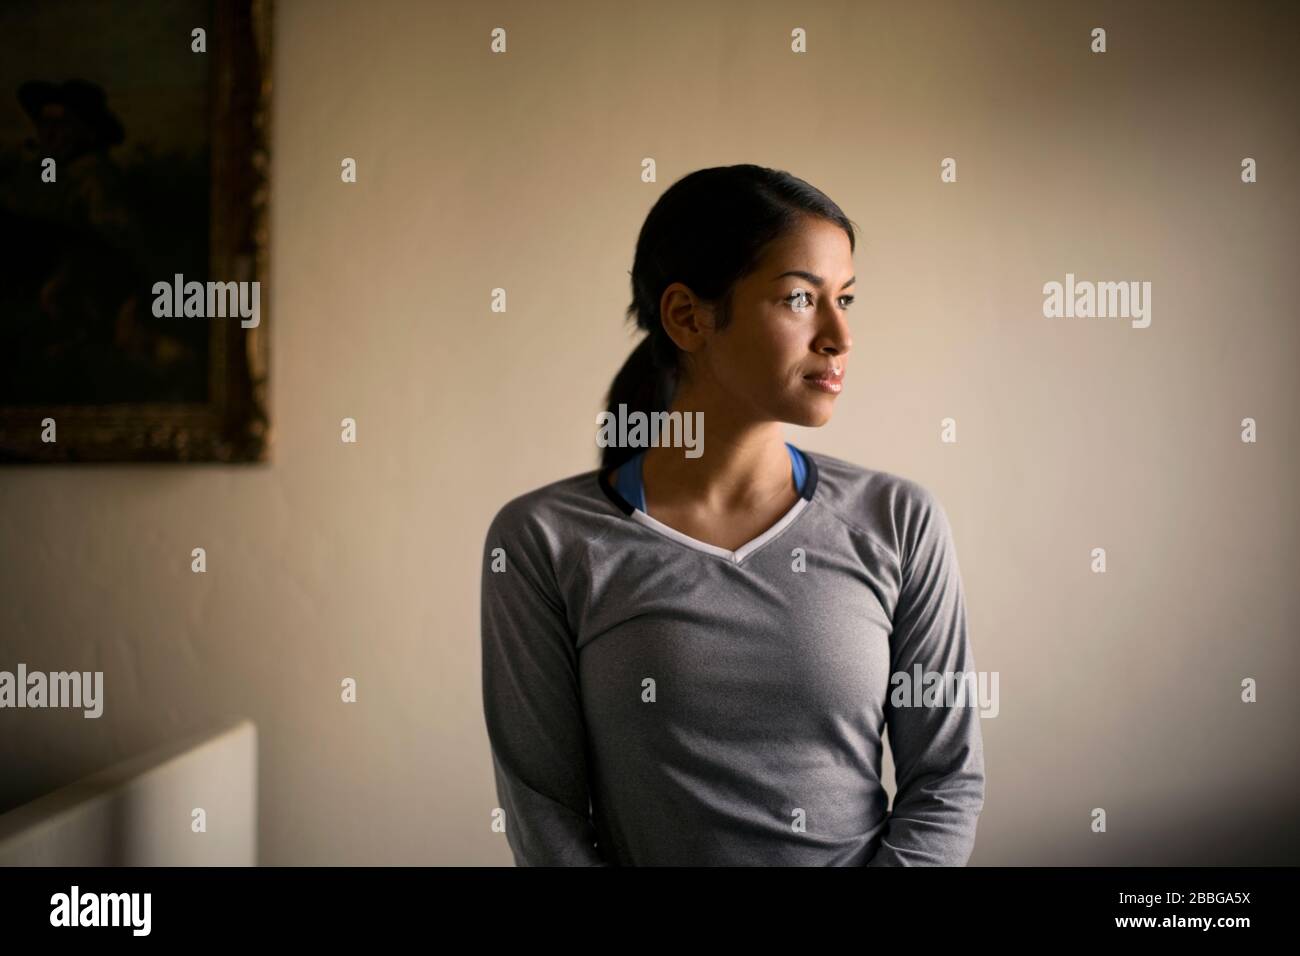 Portrait of a young woman looking thoughtfully into the distance while standing indoors Stock Photo